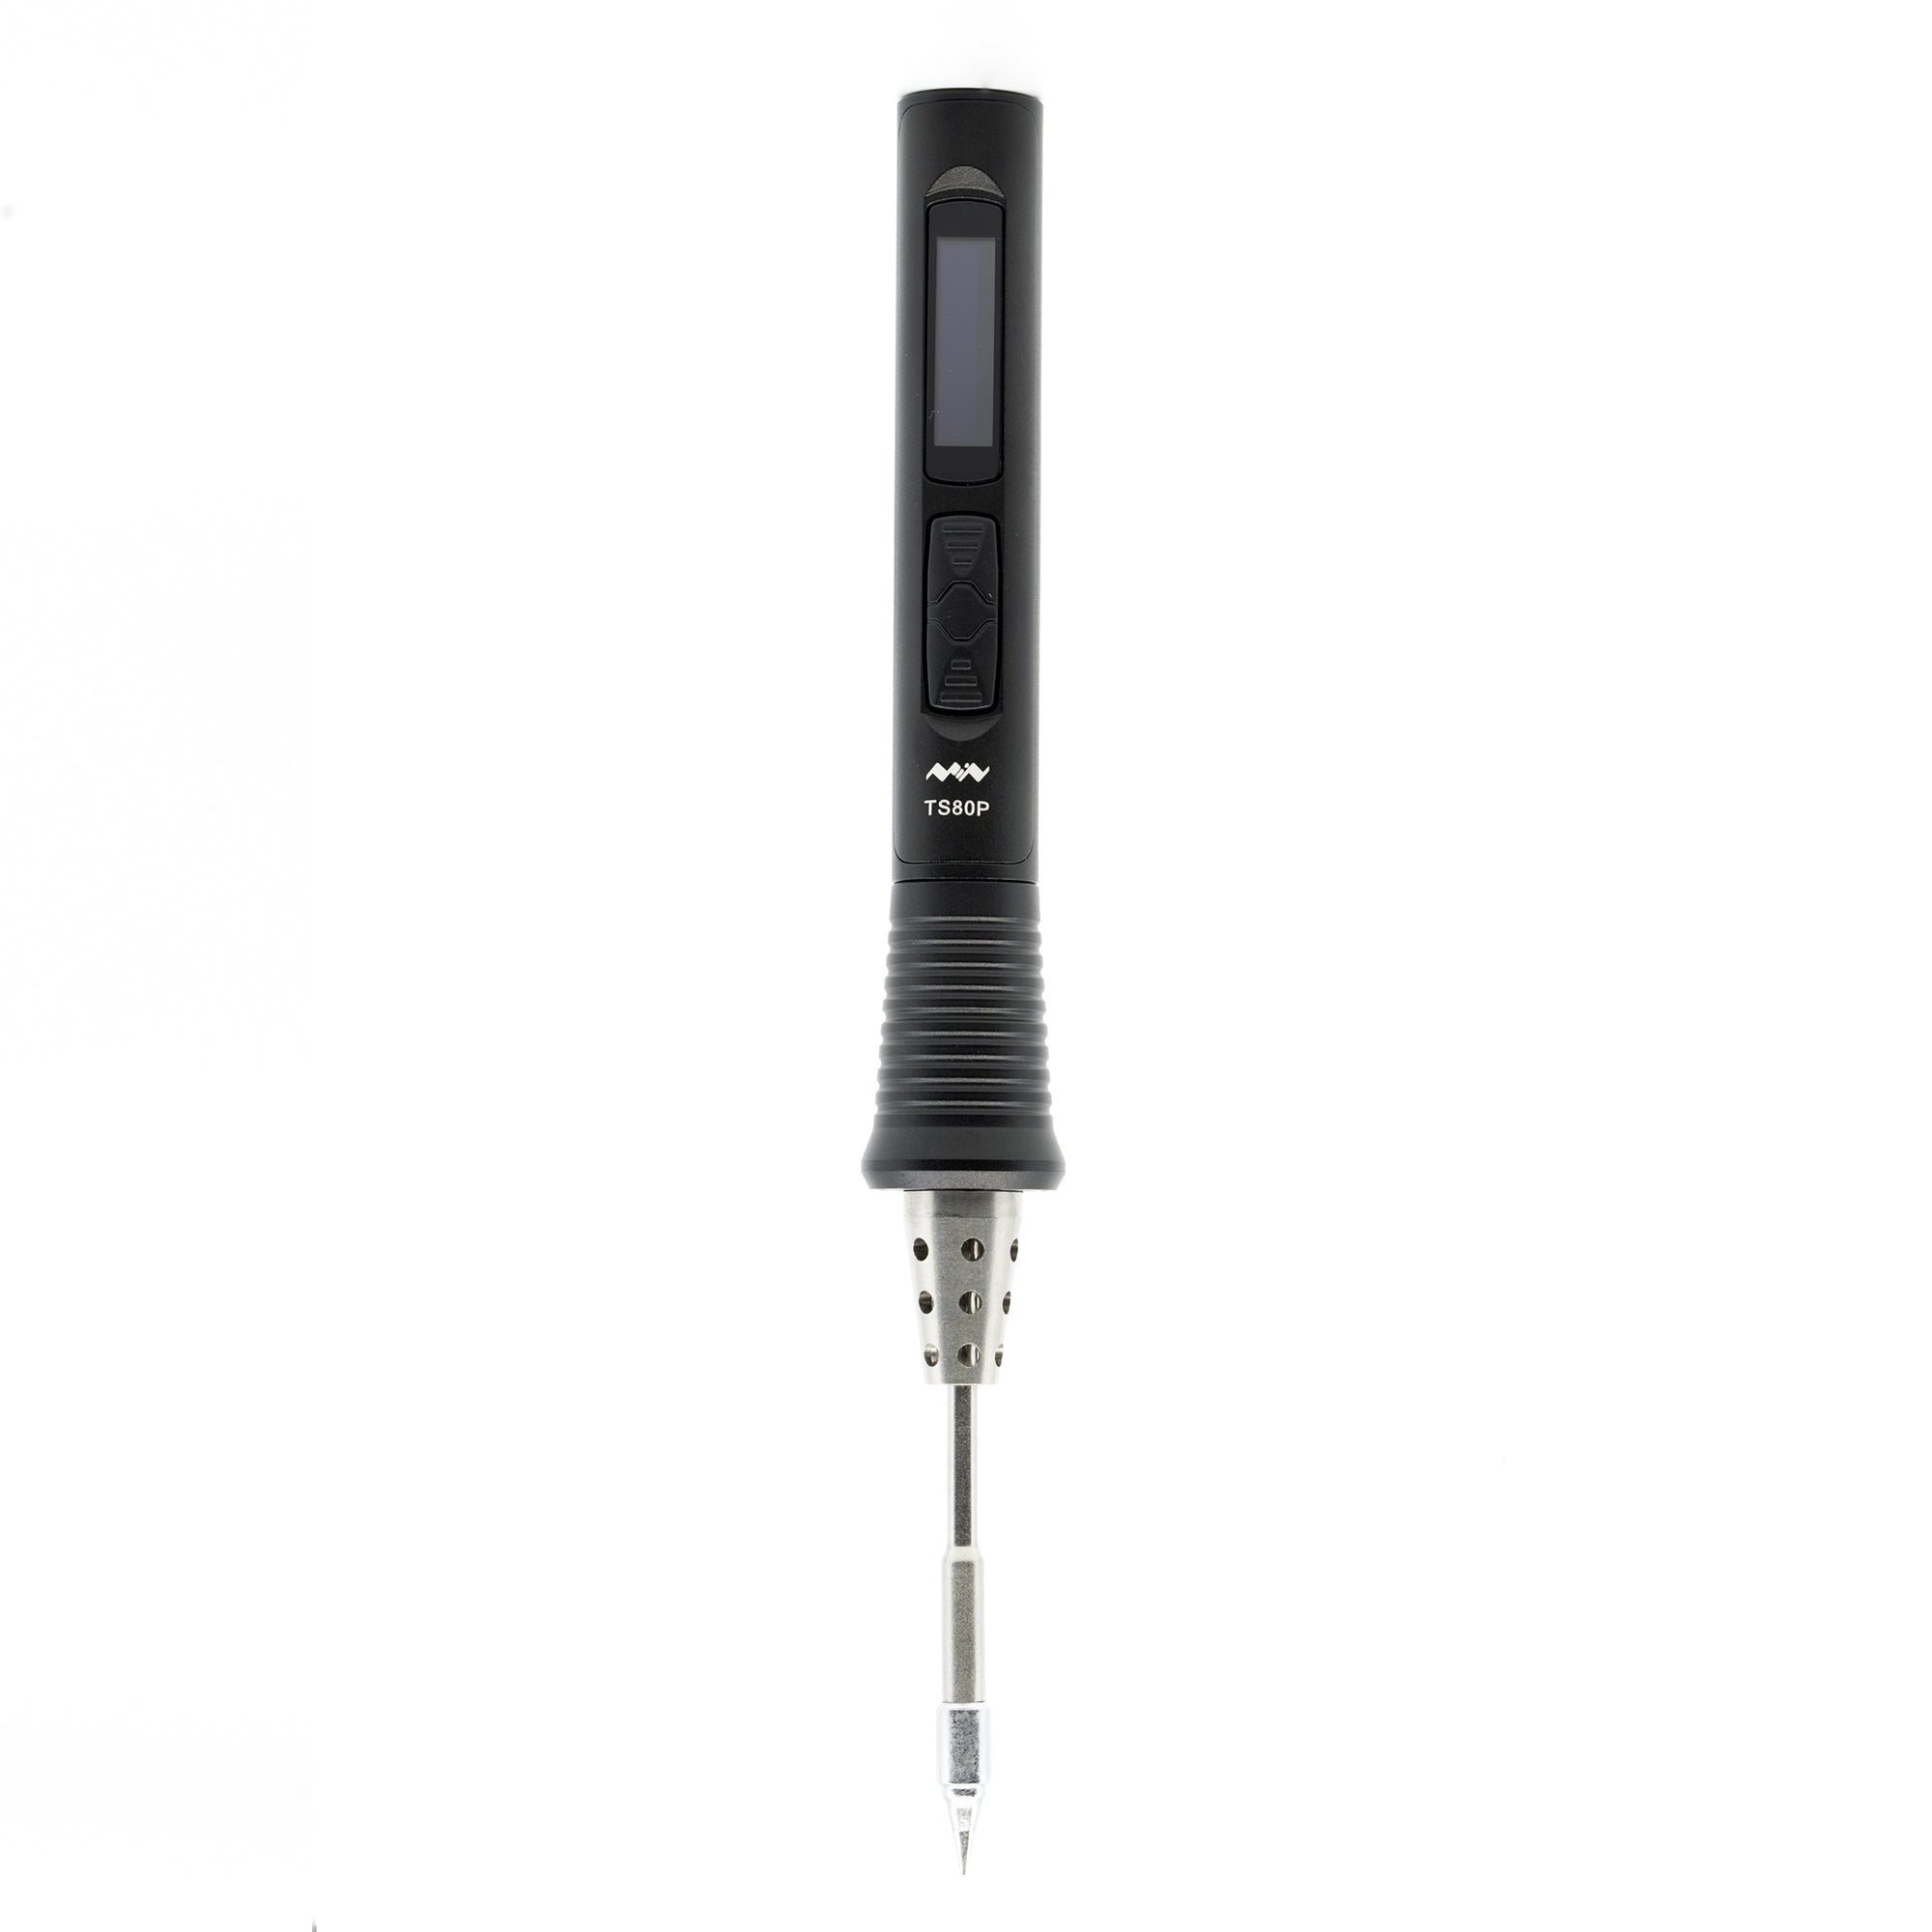 Miniware TS80P (More Package) Smart Soldering Iron